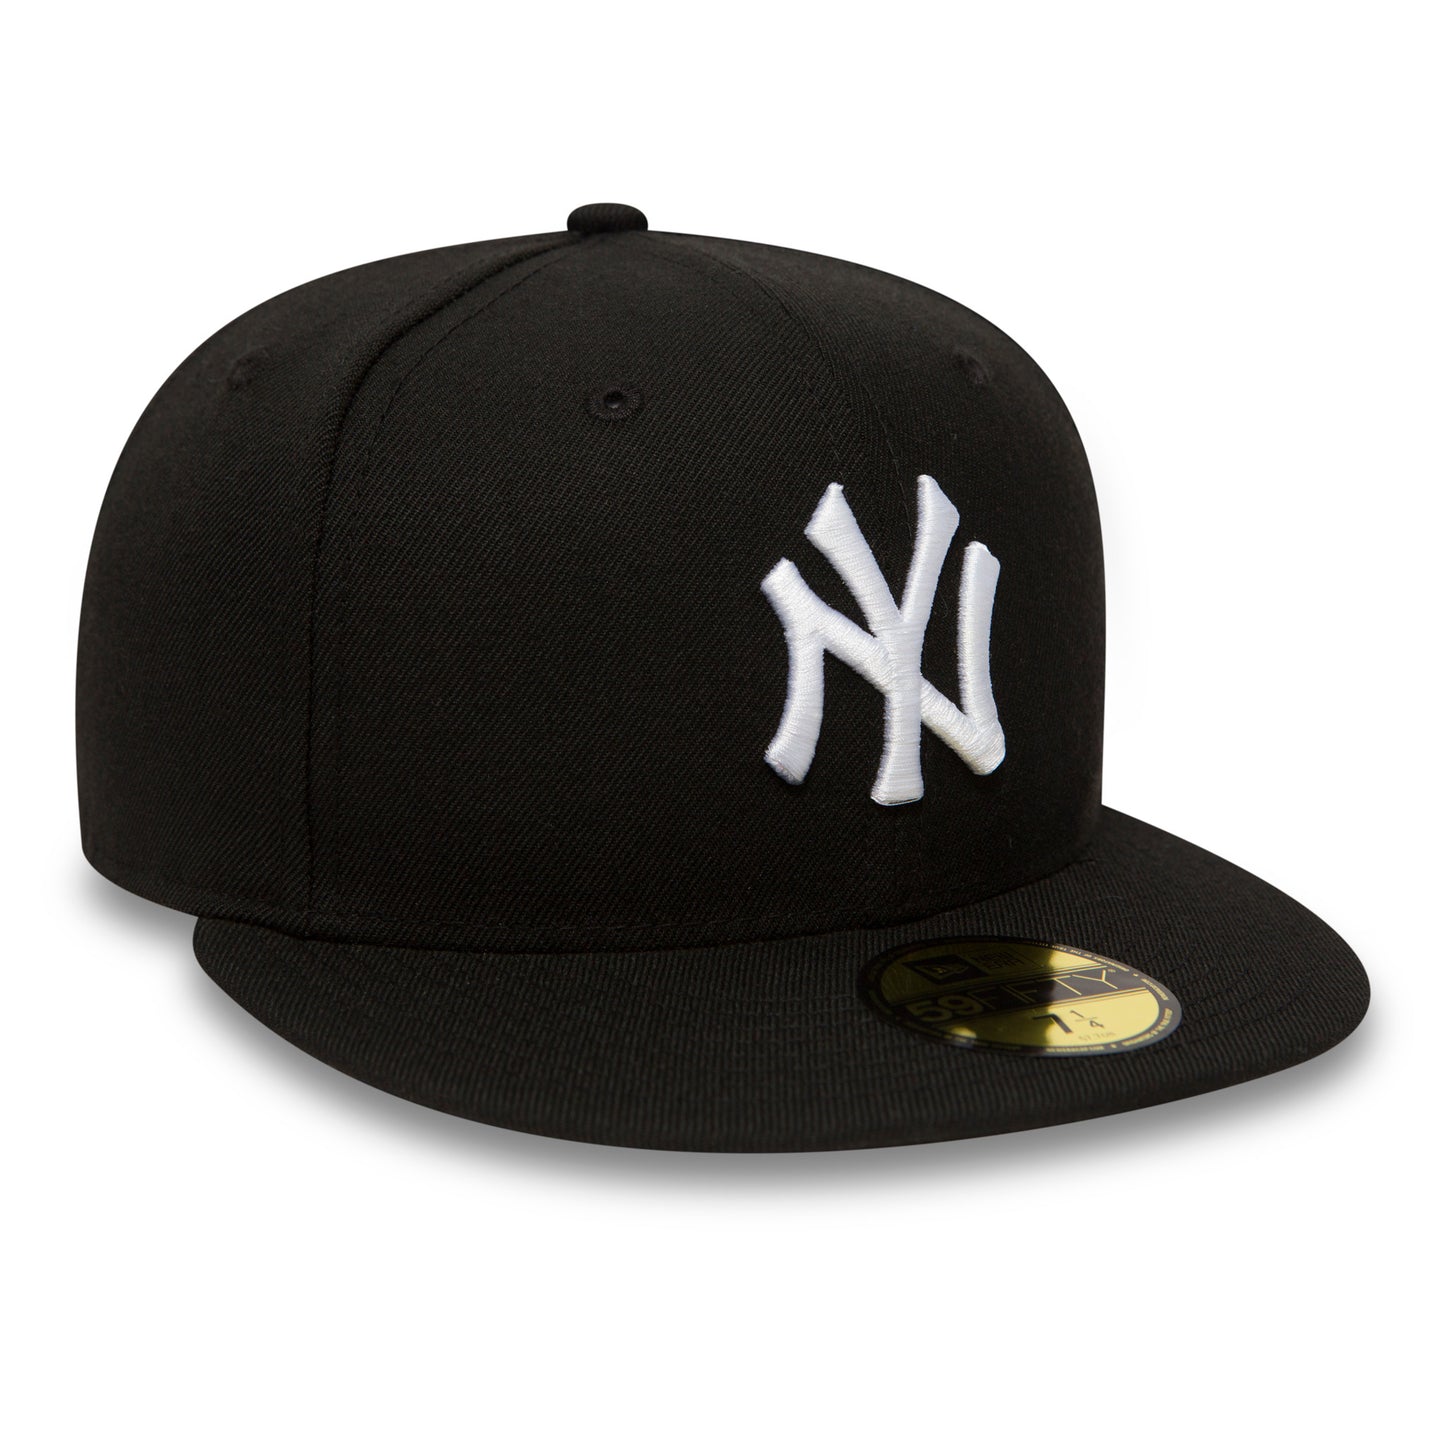 New York Yankees 59Fifty Fitted Cap - Black - Headz Up 